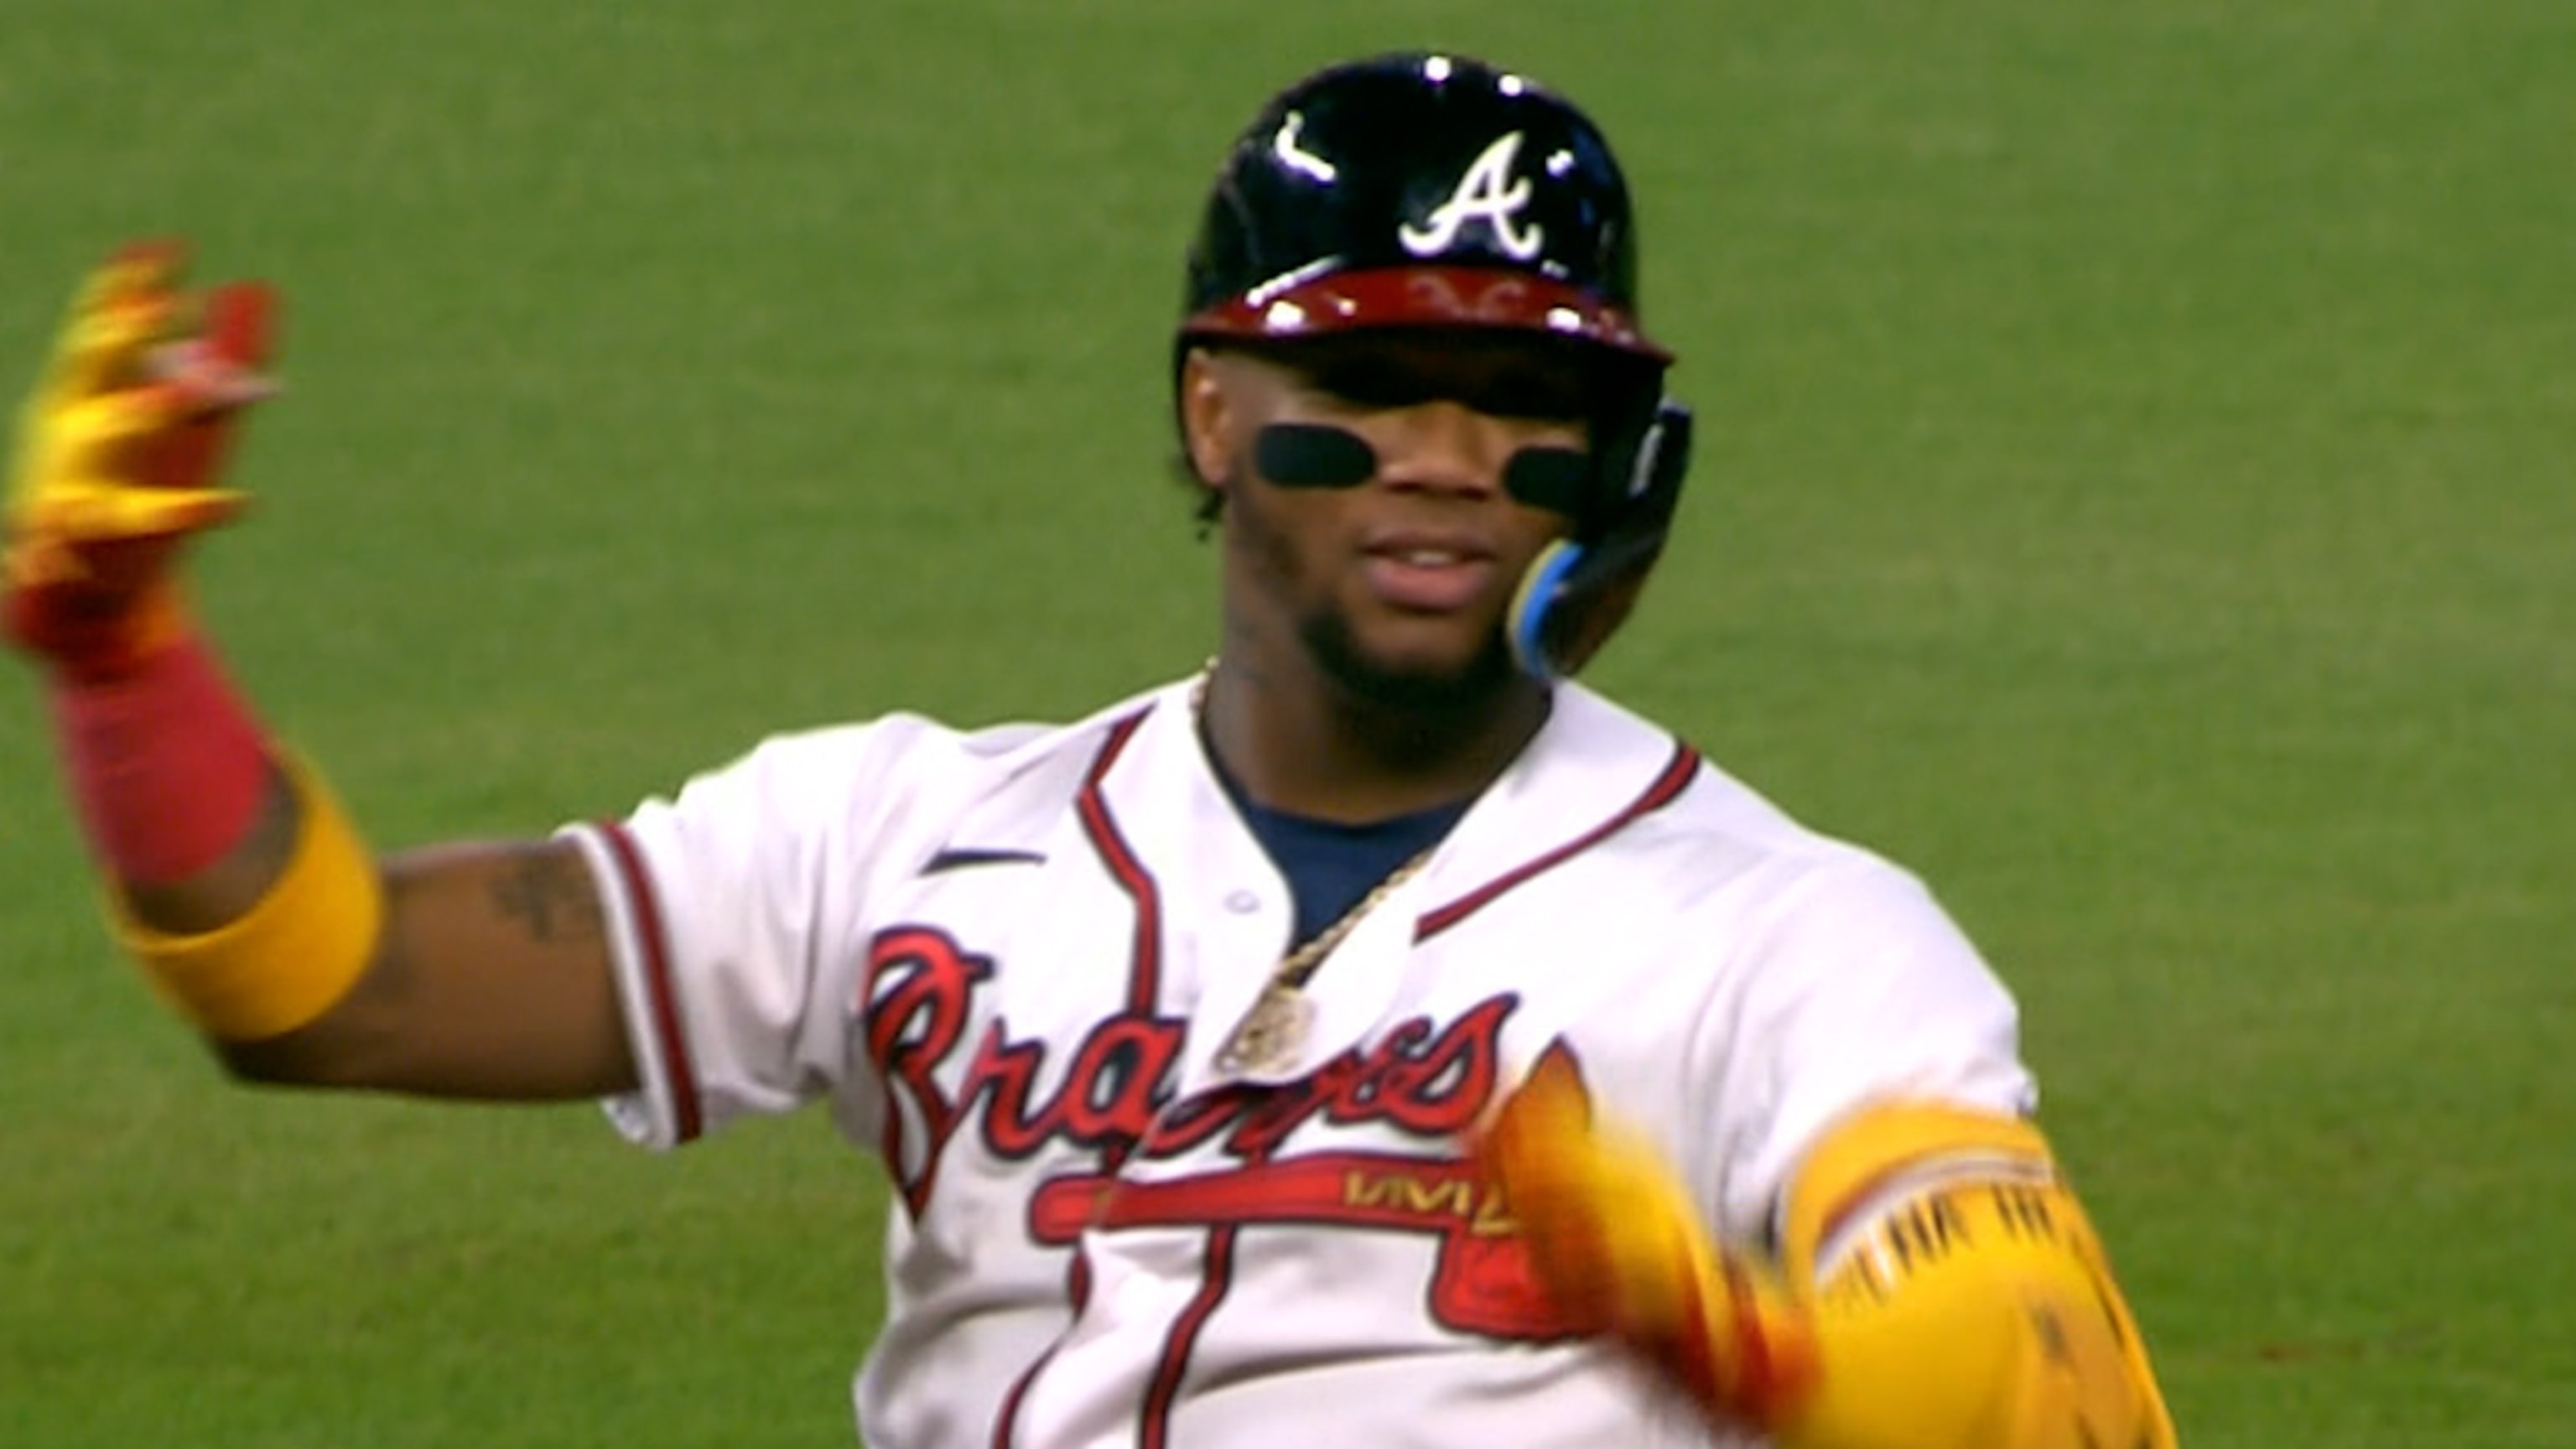 Ronald Acuña Jr. homers twice, but Braves come up short in 6-5